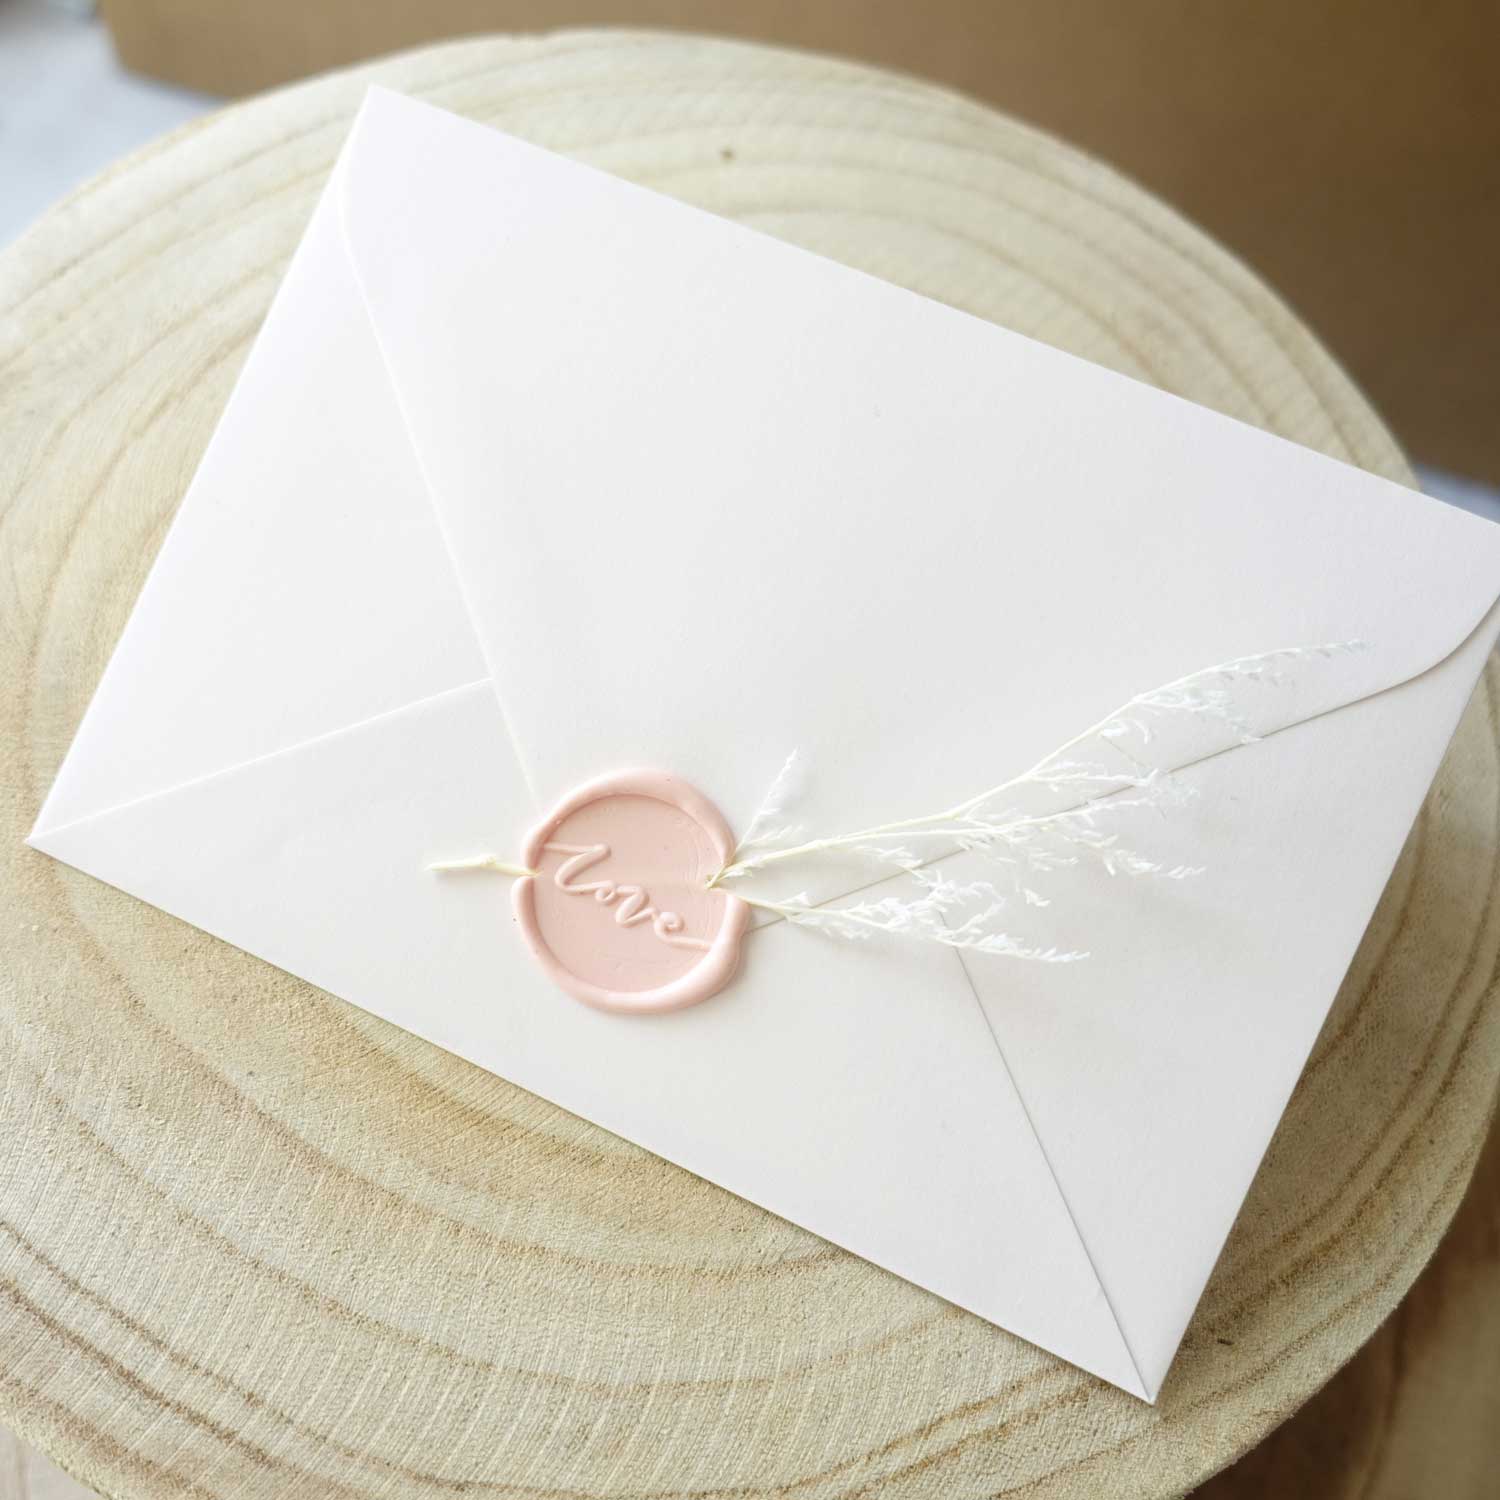 pink love wax seal on envelope with foliage